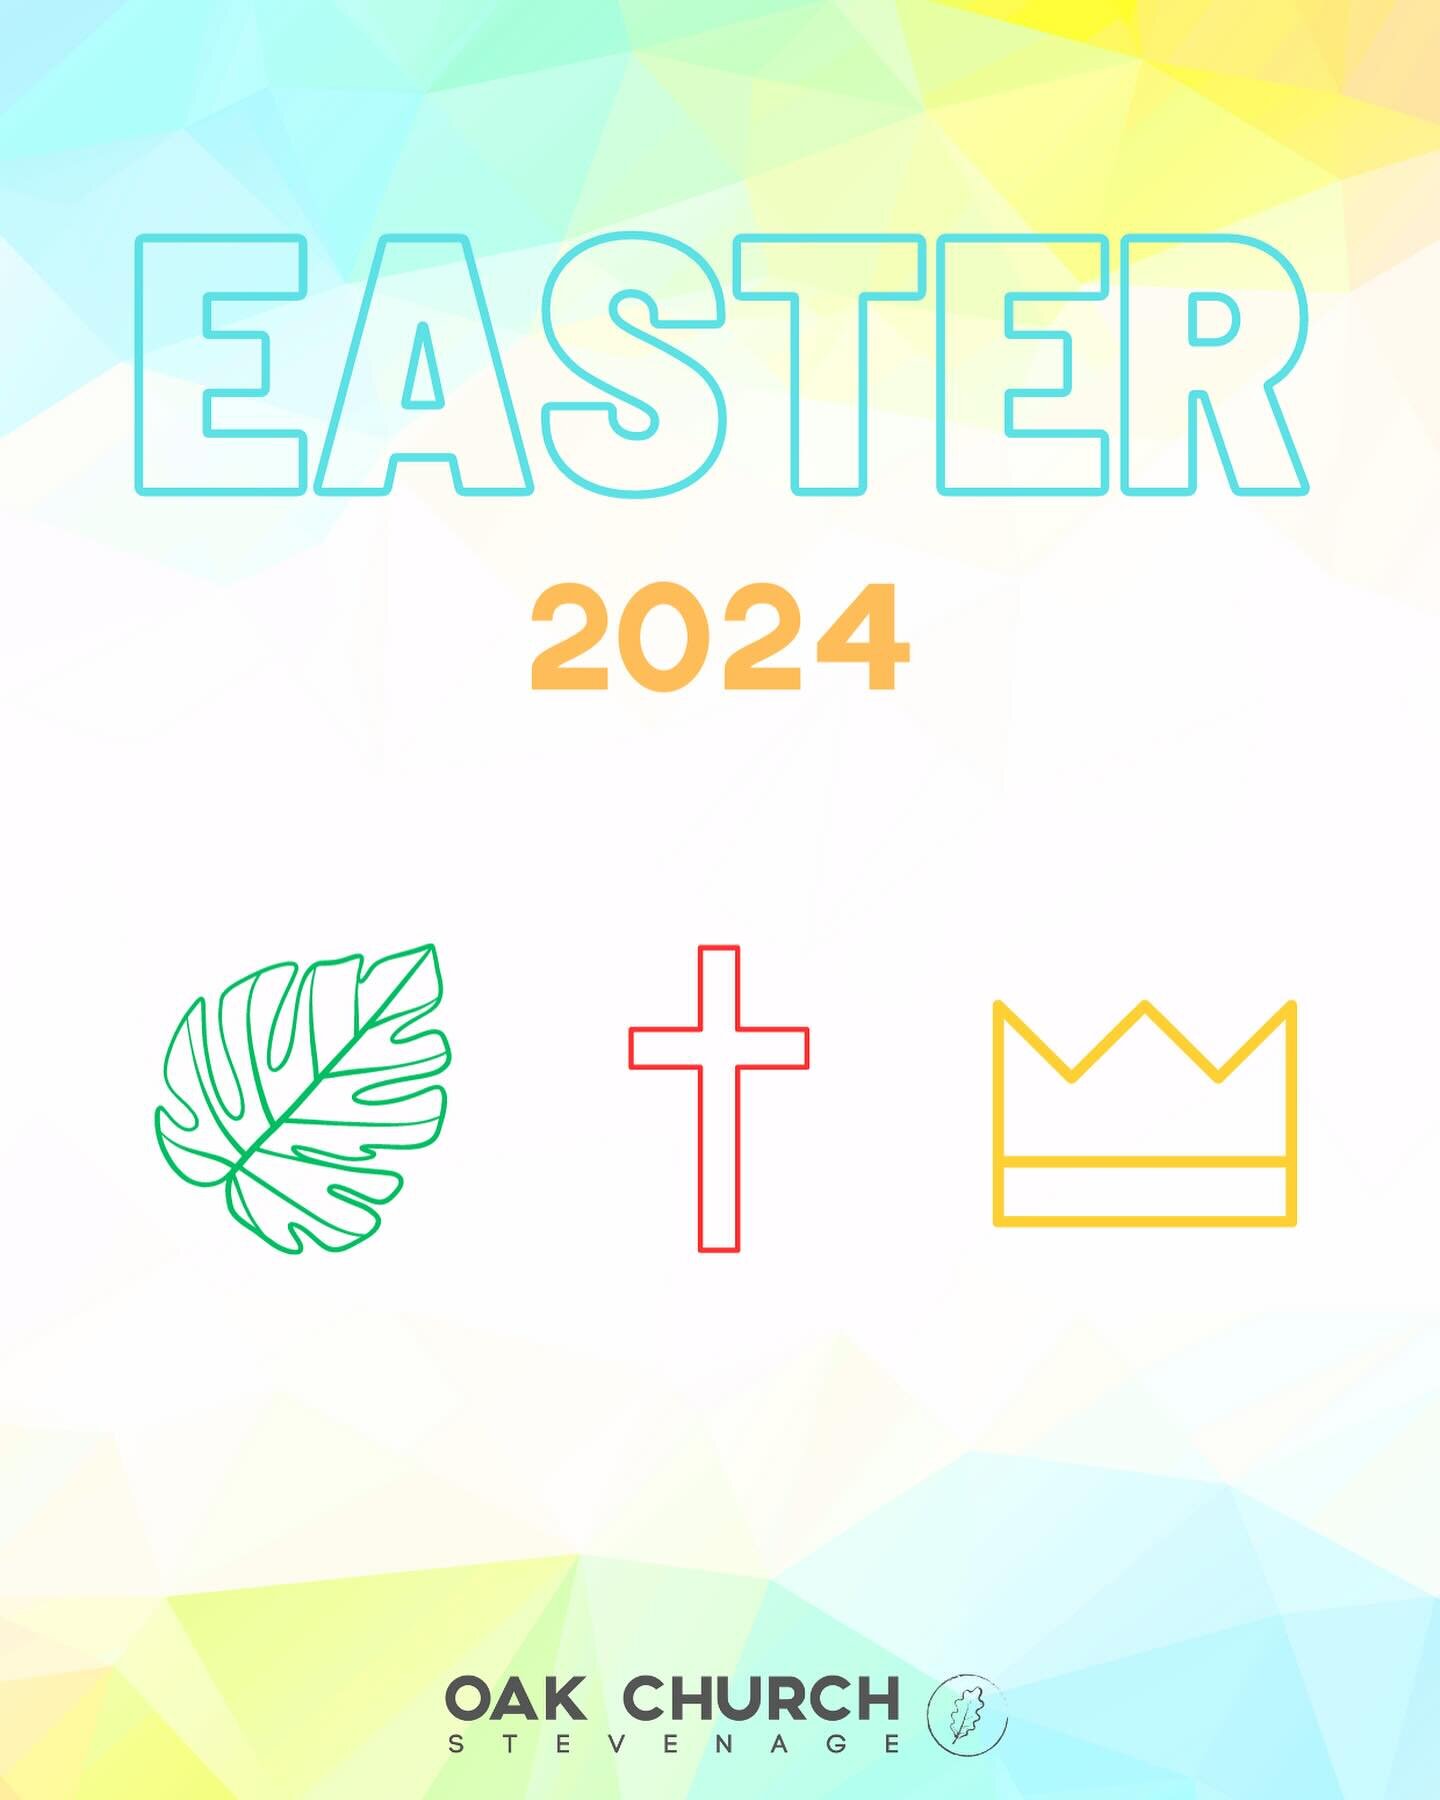 Join us this Easter as we come together across different days to remember Jesus&rsquo; death &amp; resurrection. 
We cannot wait to see you!